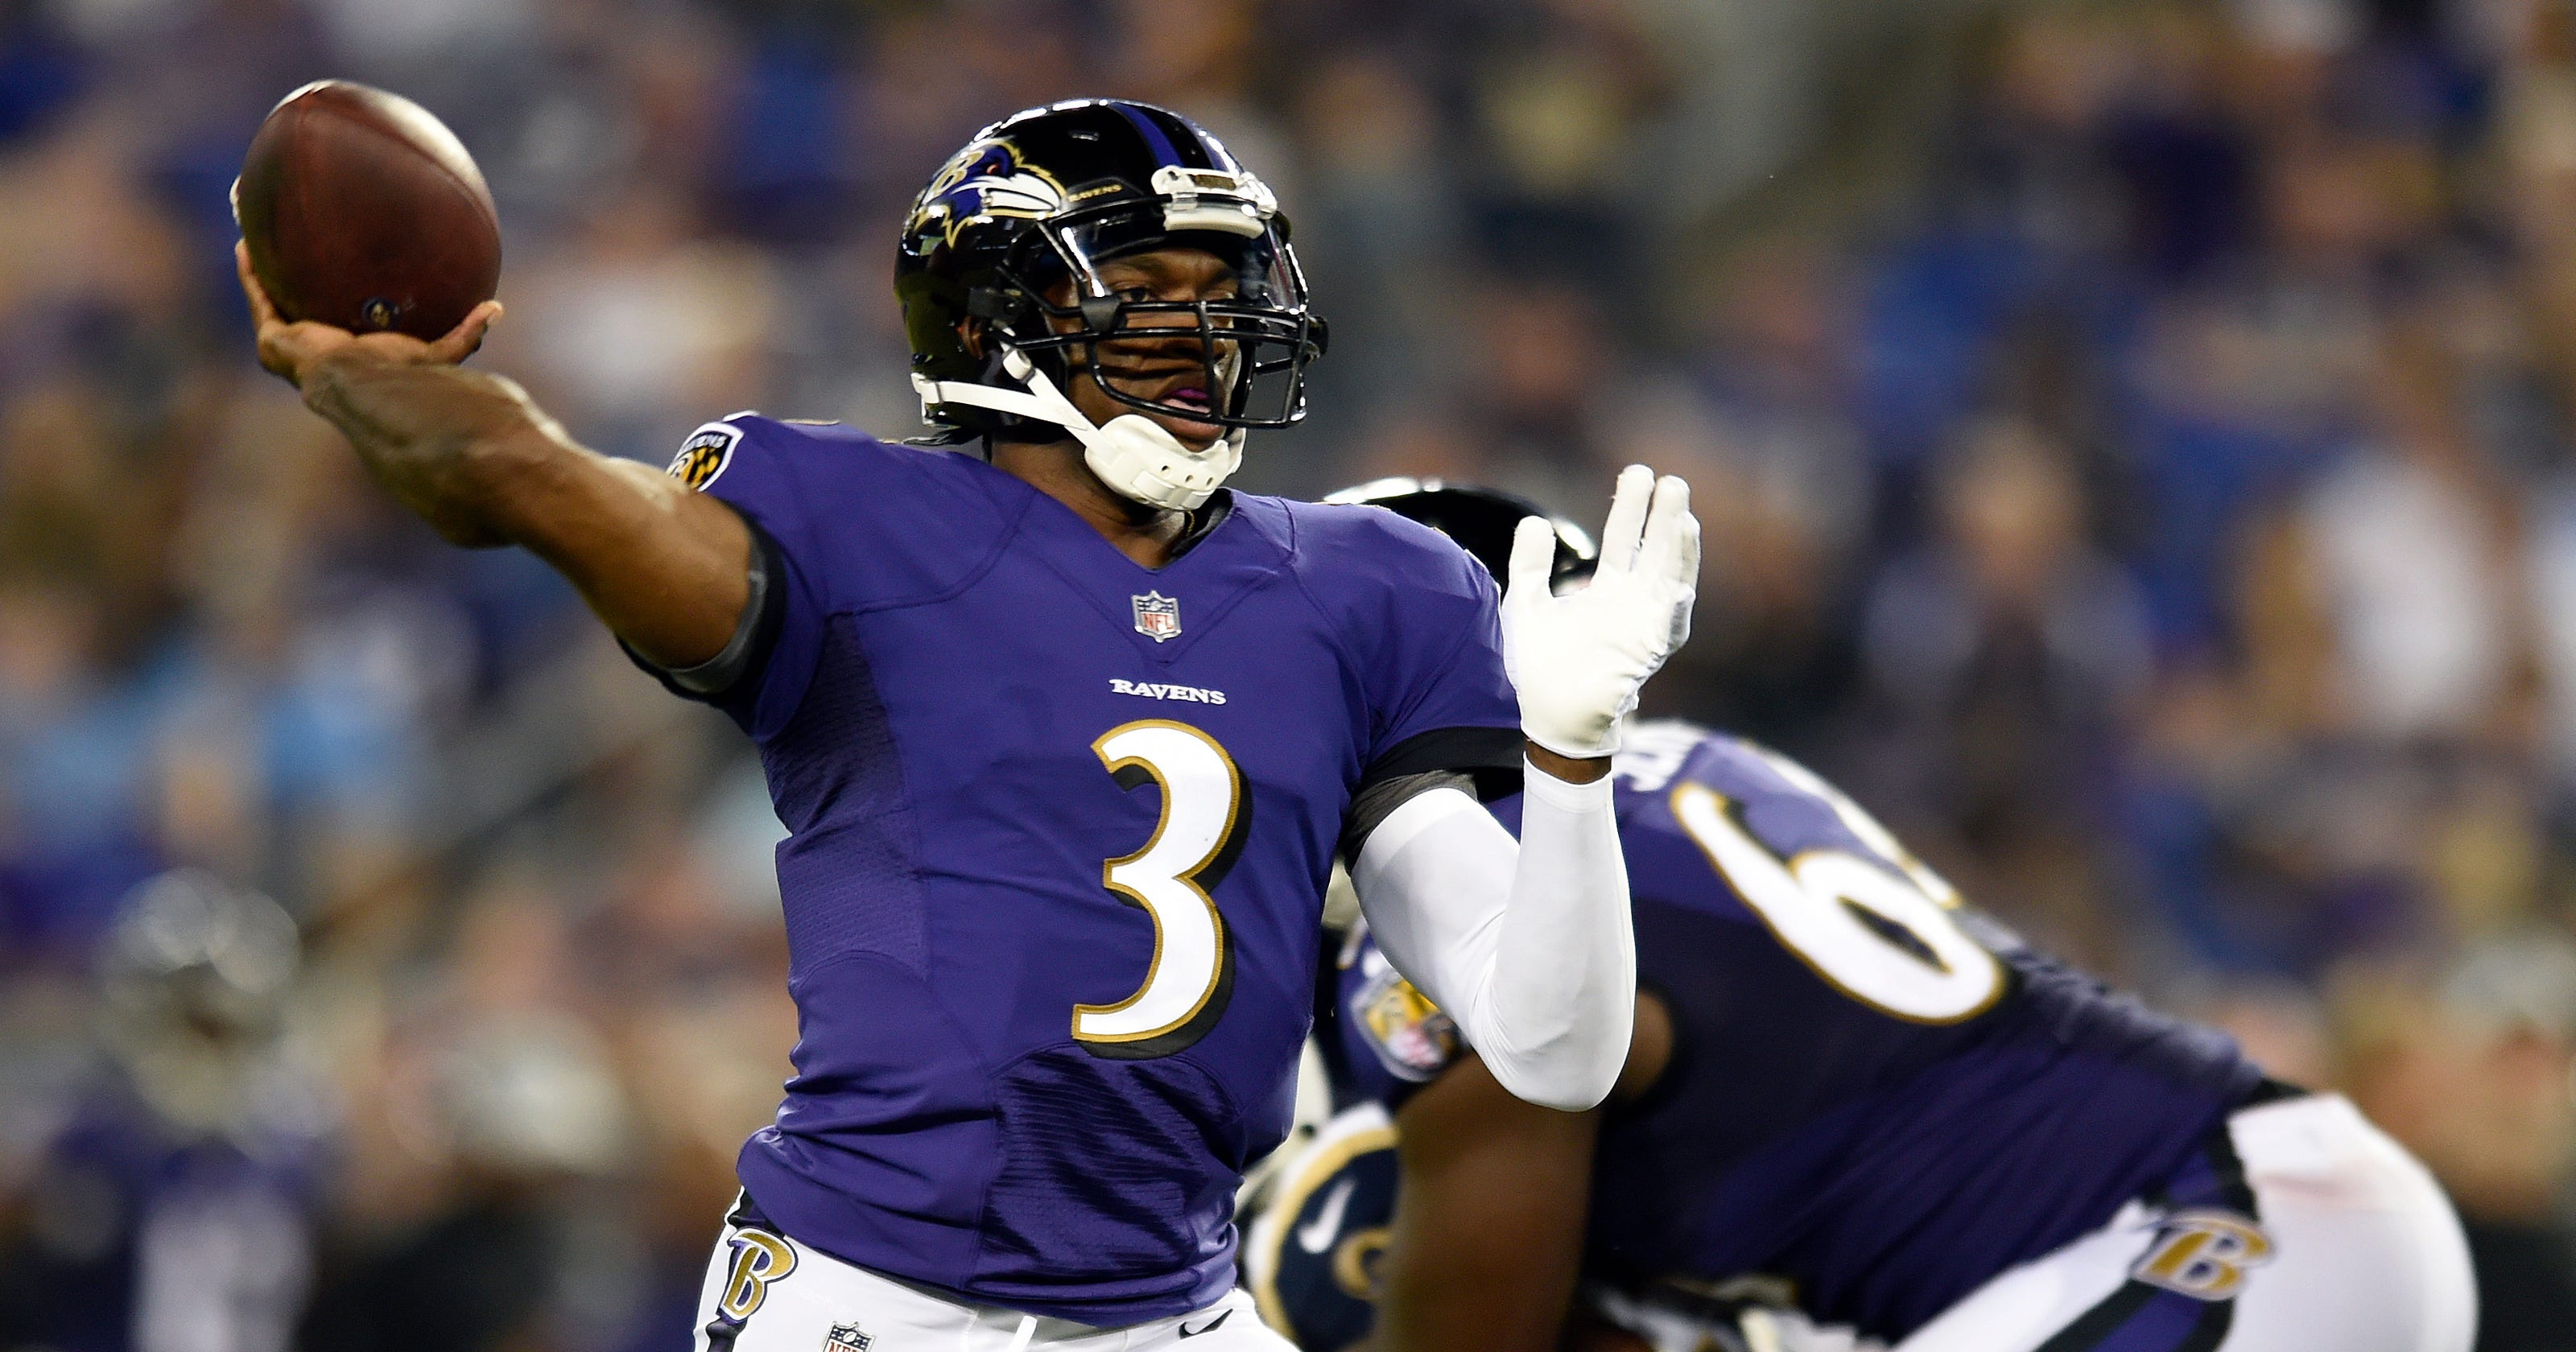 If Flacco can't go, Jackson and RG3 ready to roll for Ravens